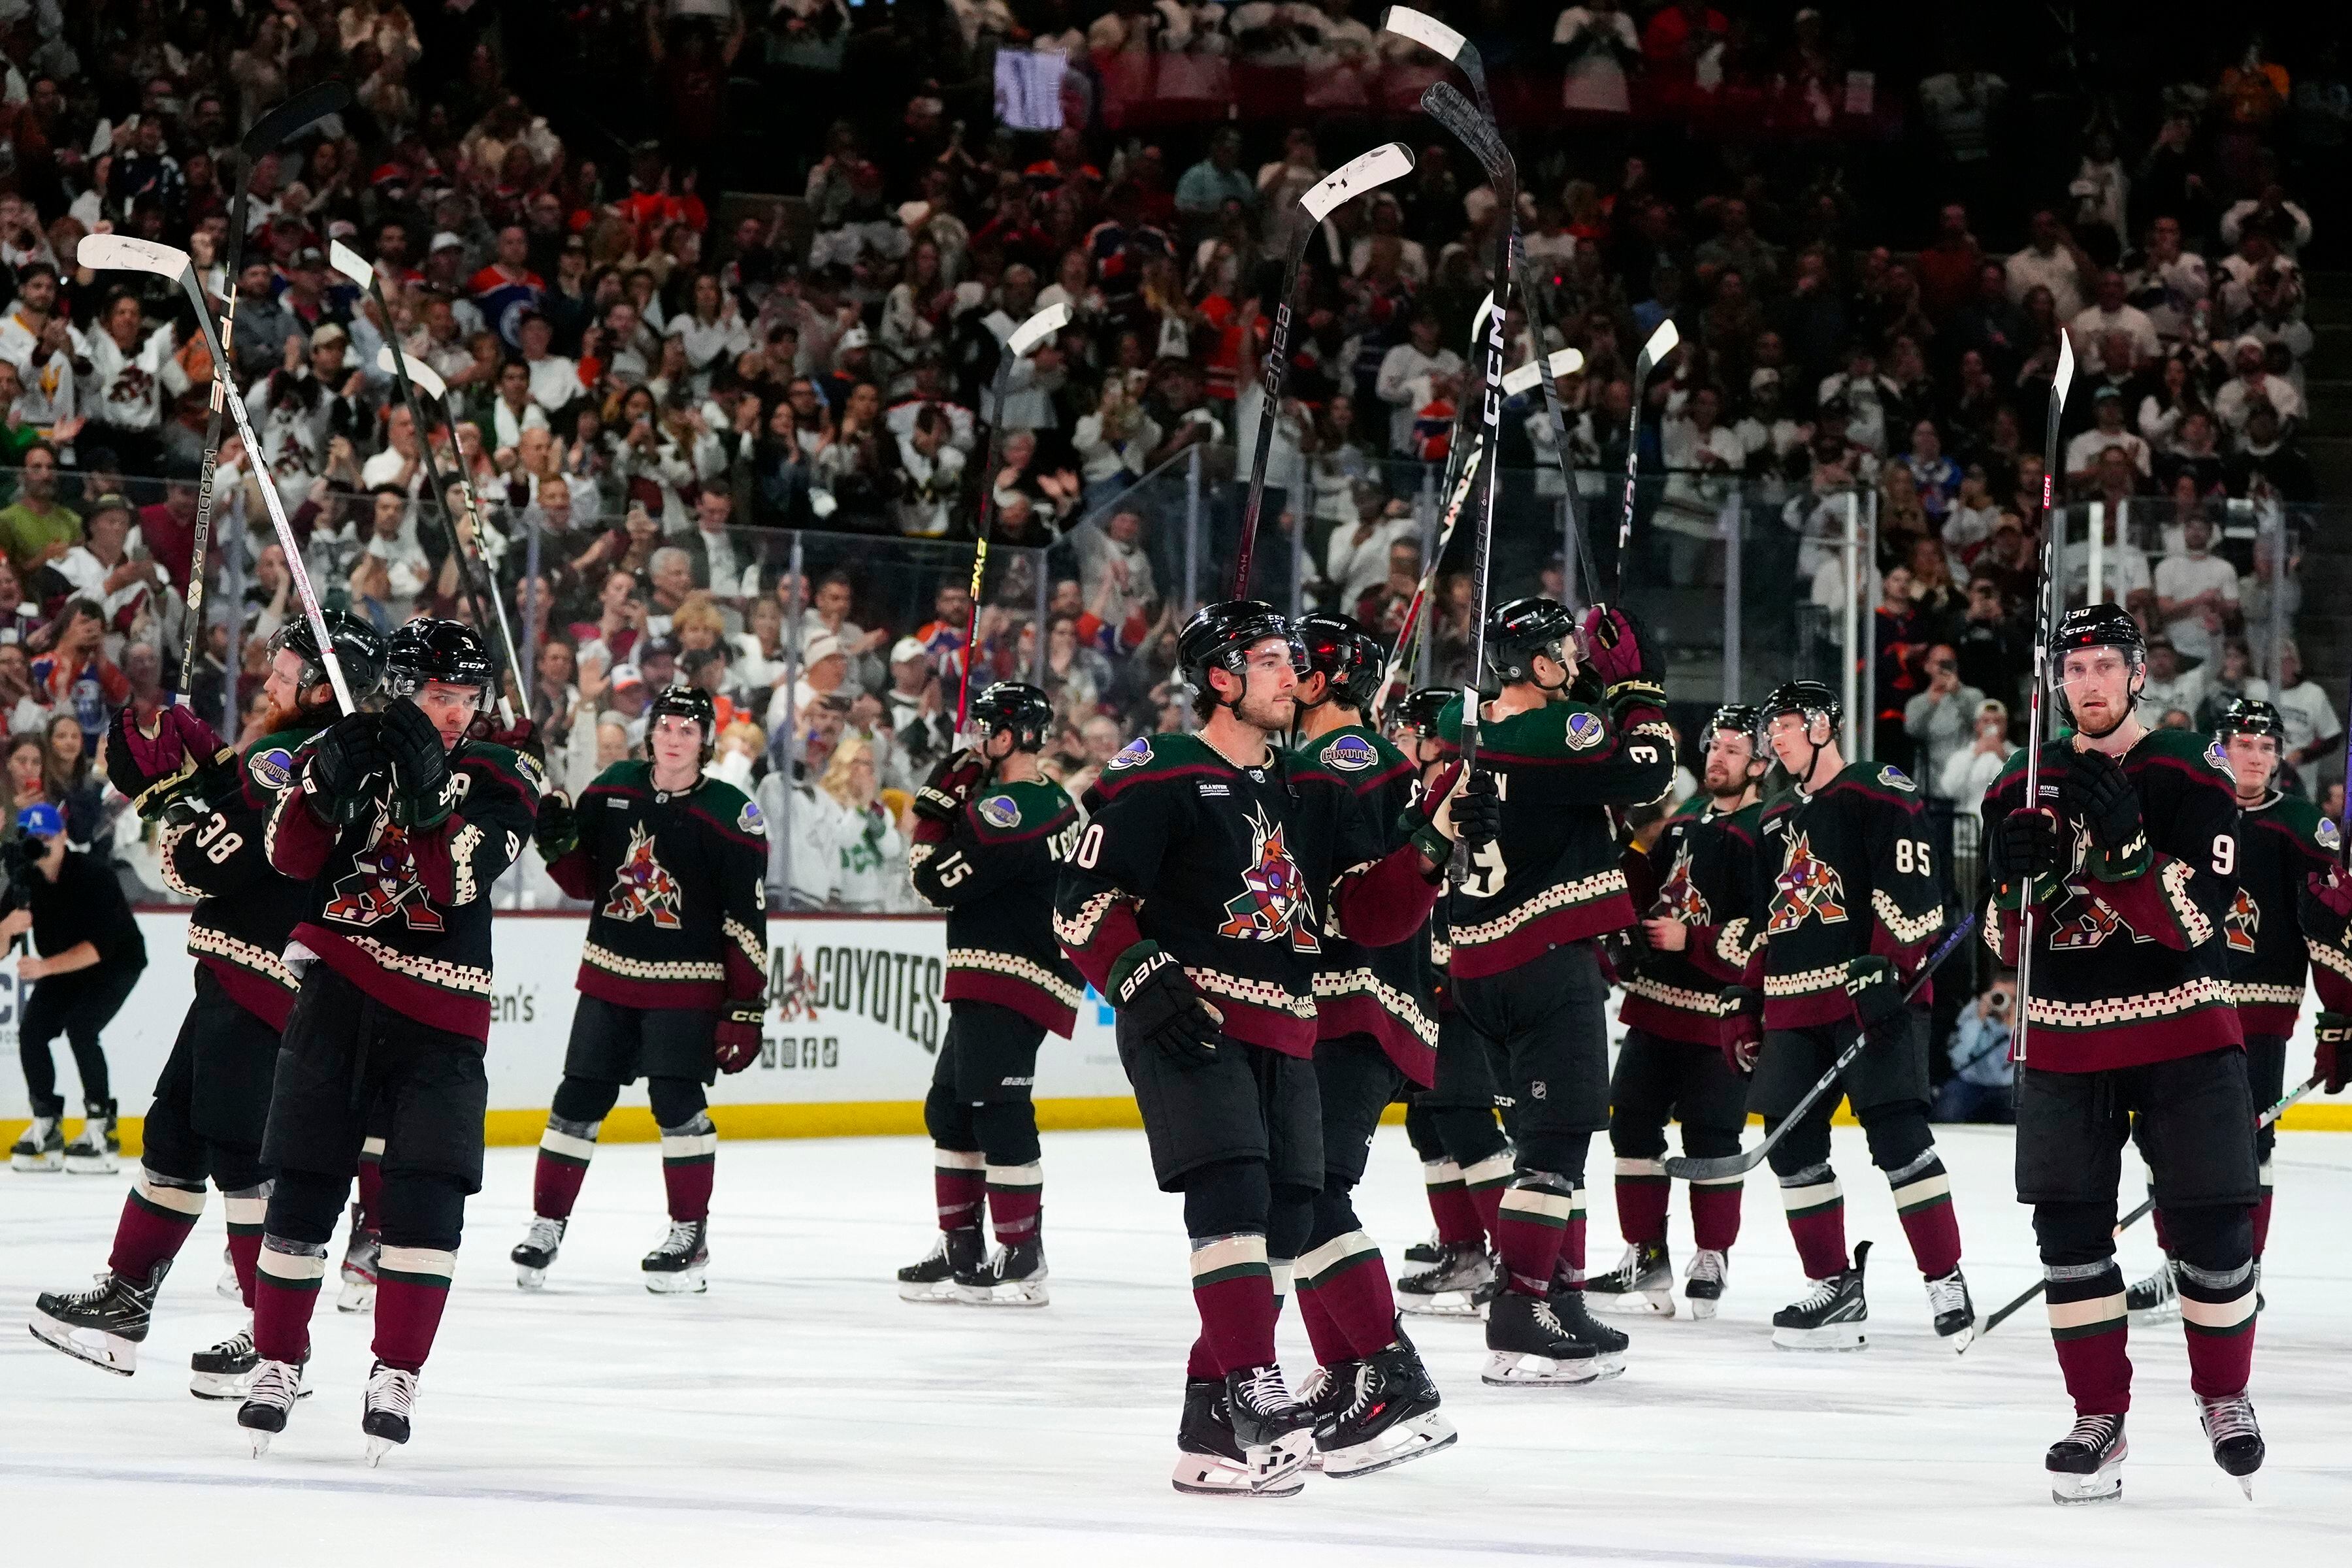 (Ross D. Franklin | AP) Arizona Coyotes players acknowledge the fans after the final whistle in Tempe Wednesday. Team owner Alex Meruelo agreed to sell franchise's hockey operations to Utah Jazz owner Ryan Smith, who intends to move the team to Salt Lake City.